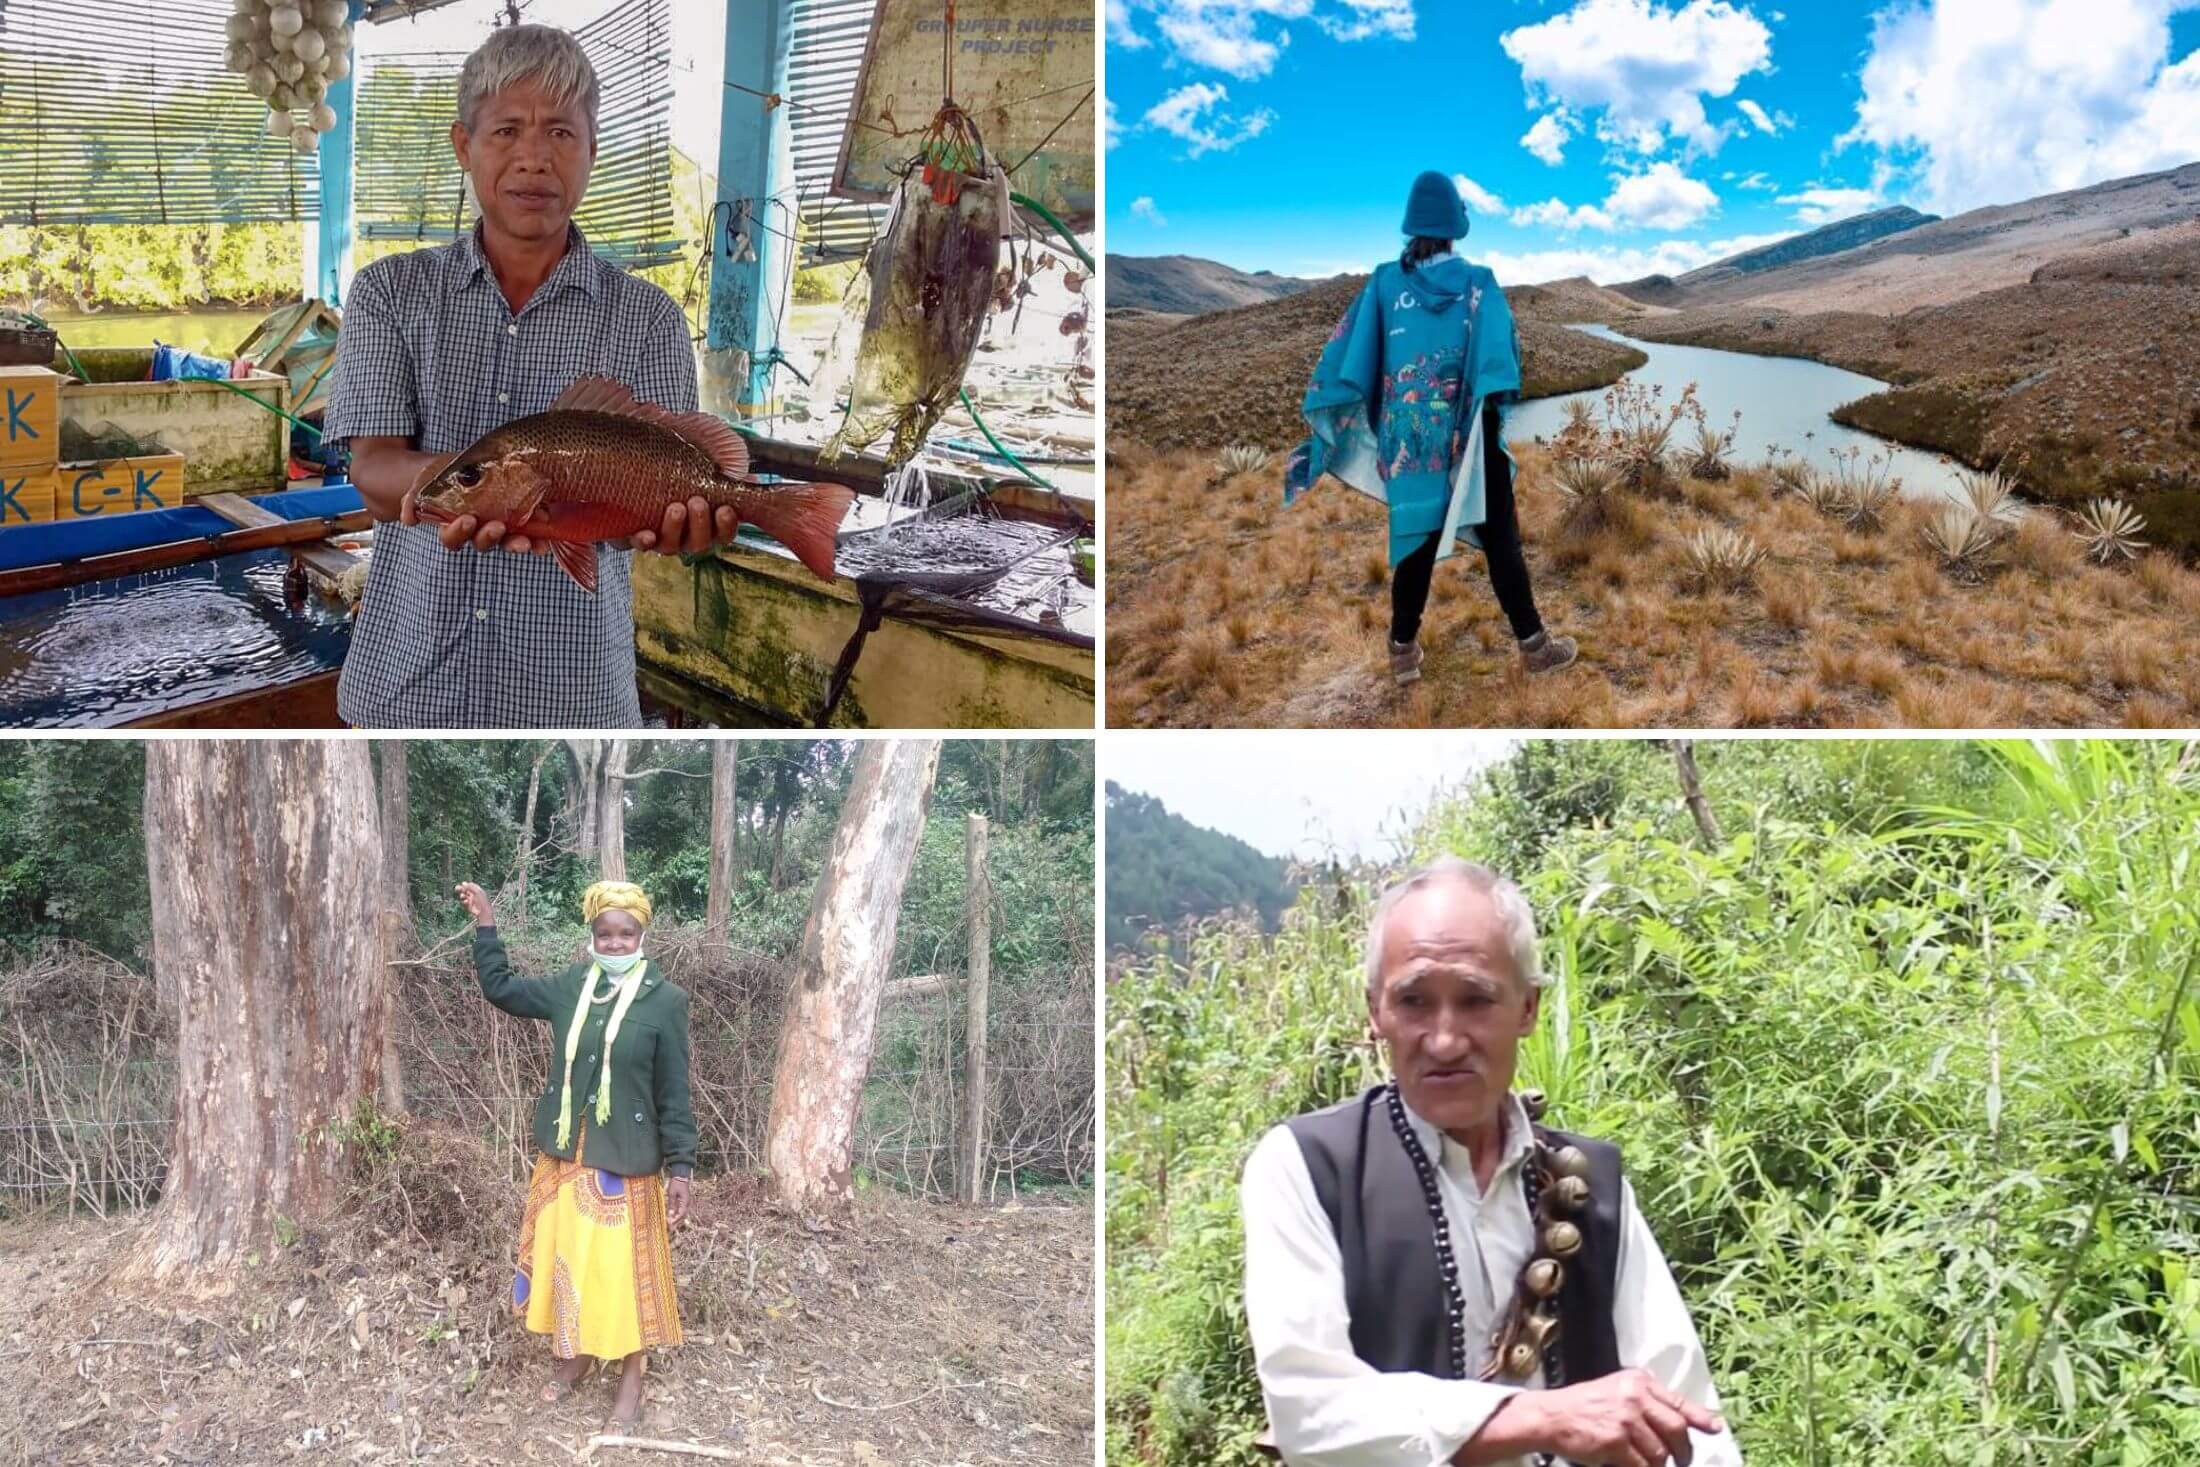 A square collage of four photos with a Filipino man holding a fish in a market, a woman wrapped in an Indigenous blanket looking at a mountain in the Andes, an Indigenous Nepalese man standing on a mountainside with thick vegetation, and a Kenyan woman standing next to a large tree.